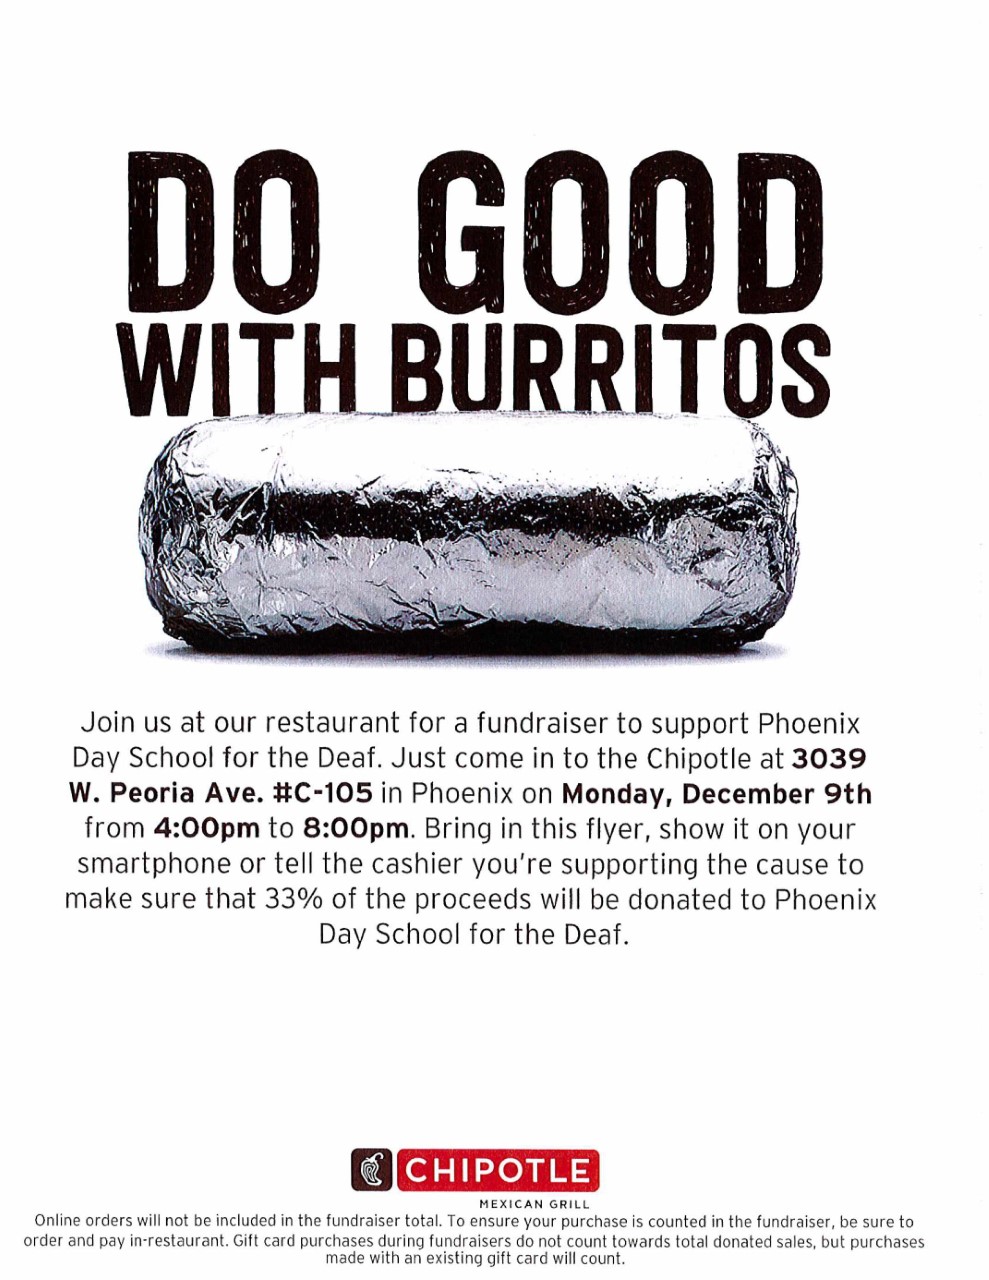 There’s a large bold lettering - “Do Good with Burritos”. We see a wrapped burrito with aluminum foil. Below reads, Join us at our restaurant for a fundraiser to support Phoenix Day School for the Deaf. Just come in to the Chipotle at 3039 W. Peoria Ave. #C-105 in Phoenix on Monday December 9th from 4:00pm to 8:00pm . Bring in this flyer, show it on your smartphone or tell the cashier you're supporting the cause to make sure that 33% of the proceeds will be donated to Phoenix Day School for the Deaf. There's a Chipotle logo showing white drawing of a pepper in brown square. Next to it is a red rectangular box with white lettering “Chipotle”. Under the red box have a smaller print, “Mexican Grill”. Below the page, there is a small print: Online orders will not be included in the fundraiser total. To ensure your purchase is counted in the fundraiser, be sure to order and pay in-restaurant. Gift card purchases during fundraisers do not count towards total donated sales, but purchases made with an existing gift card will count.